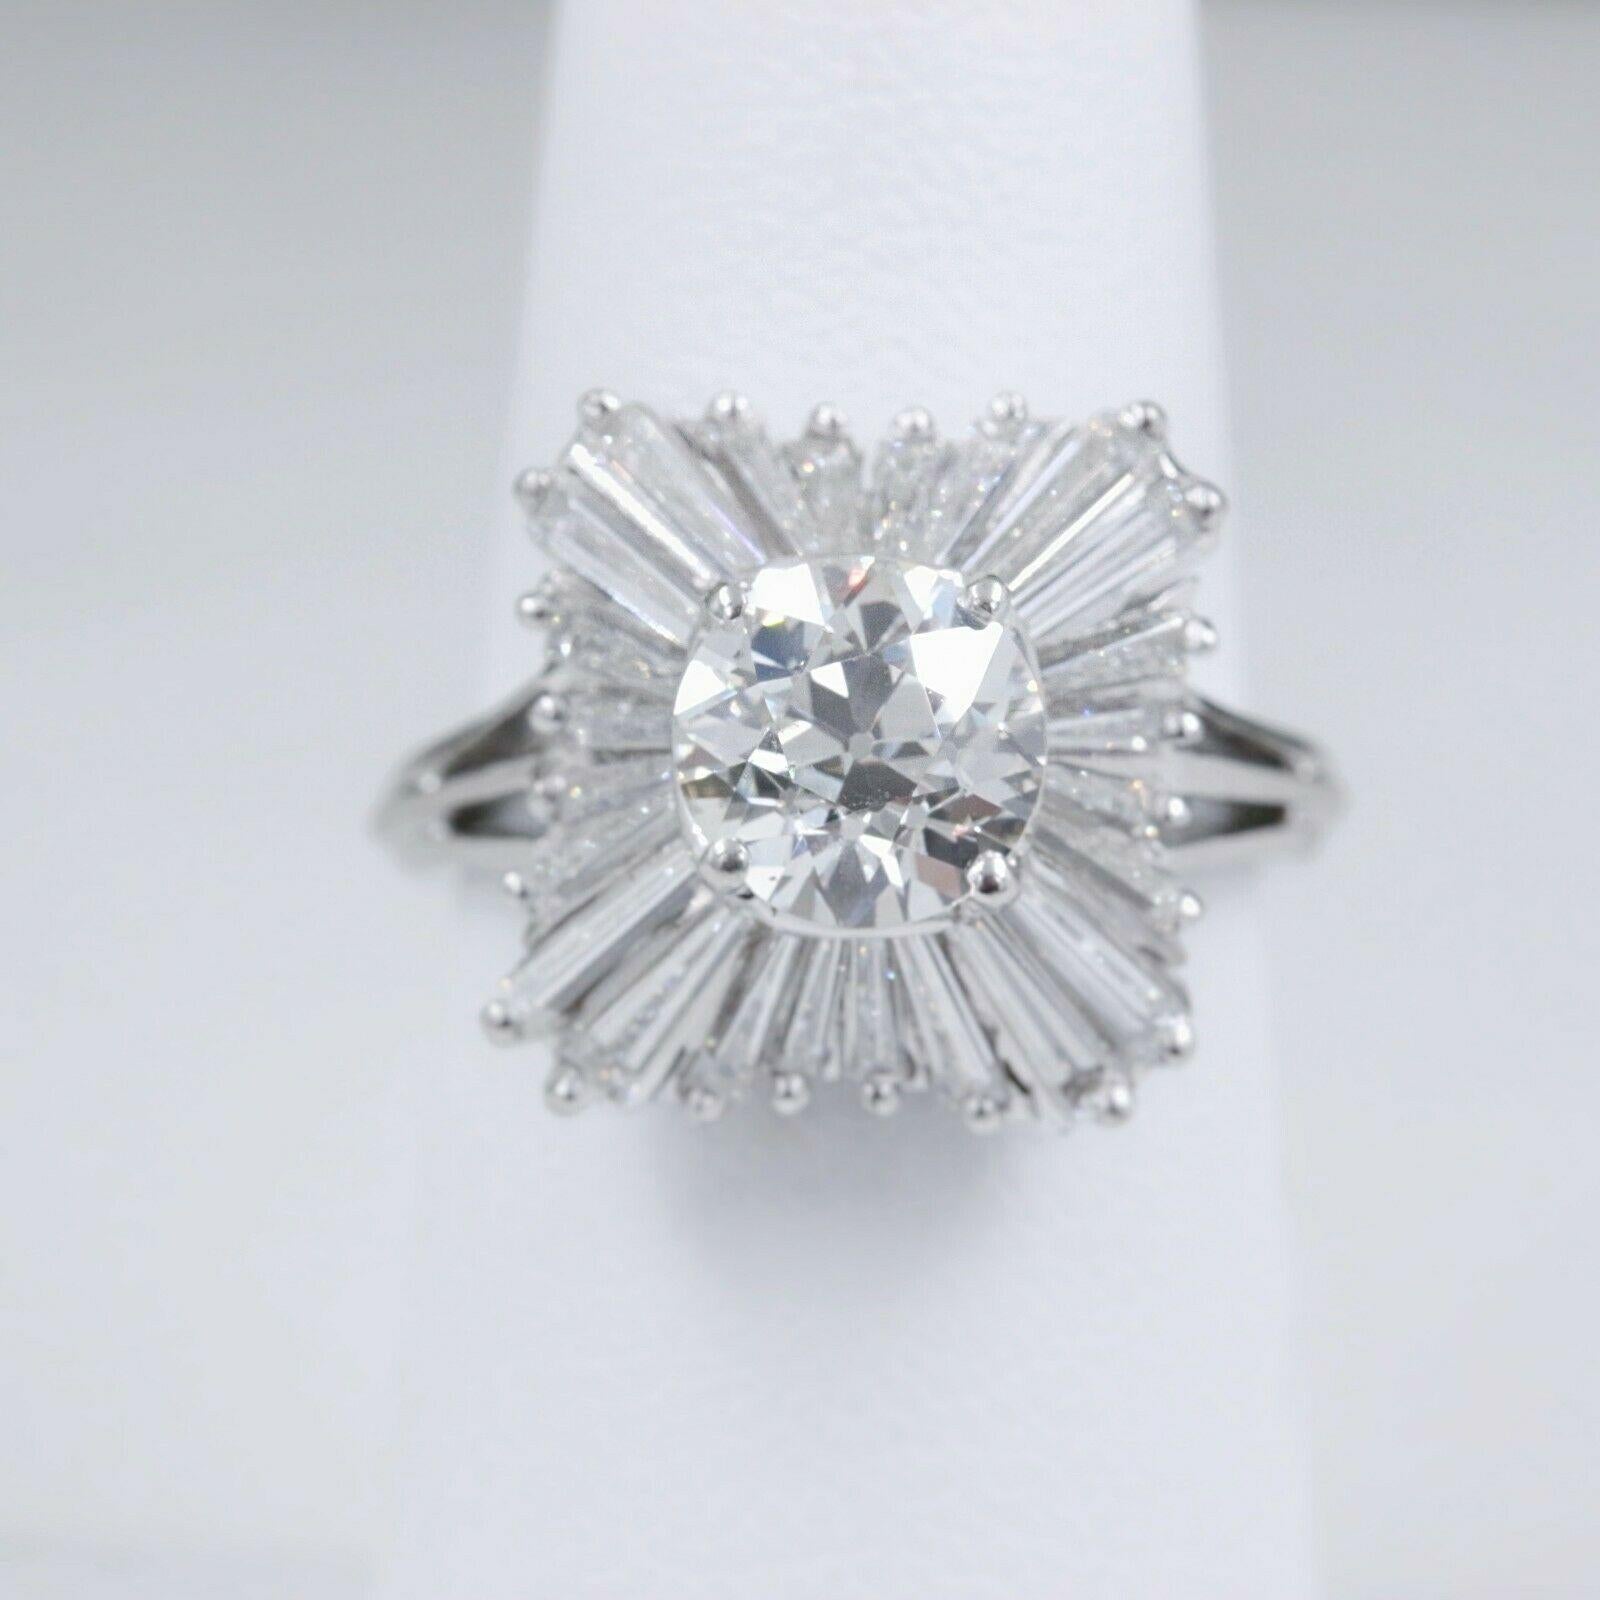 Old Cut Diamond Ballerina Ring with Tapered Baguettes

Style:  Ballerina
Serial Number:  GIA 2205007552
Metal:  Platinum
Size:  6 - sizable
Total Carat Weight:  3.56 tcw
Diamond Shape:  Old Cut Diamond 1.56 cts K color, VS2 clarity
Accent Diamonds: 